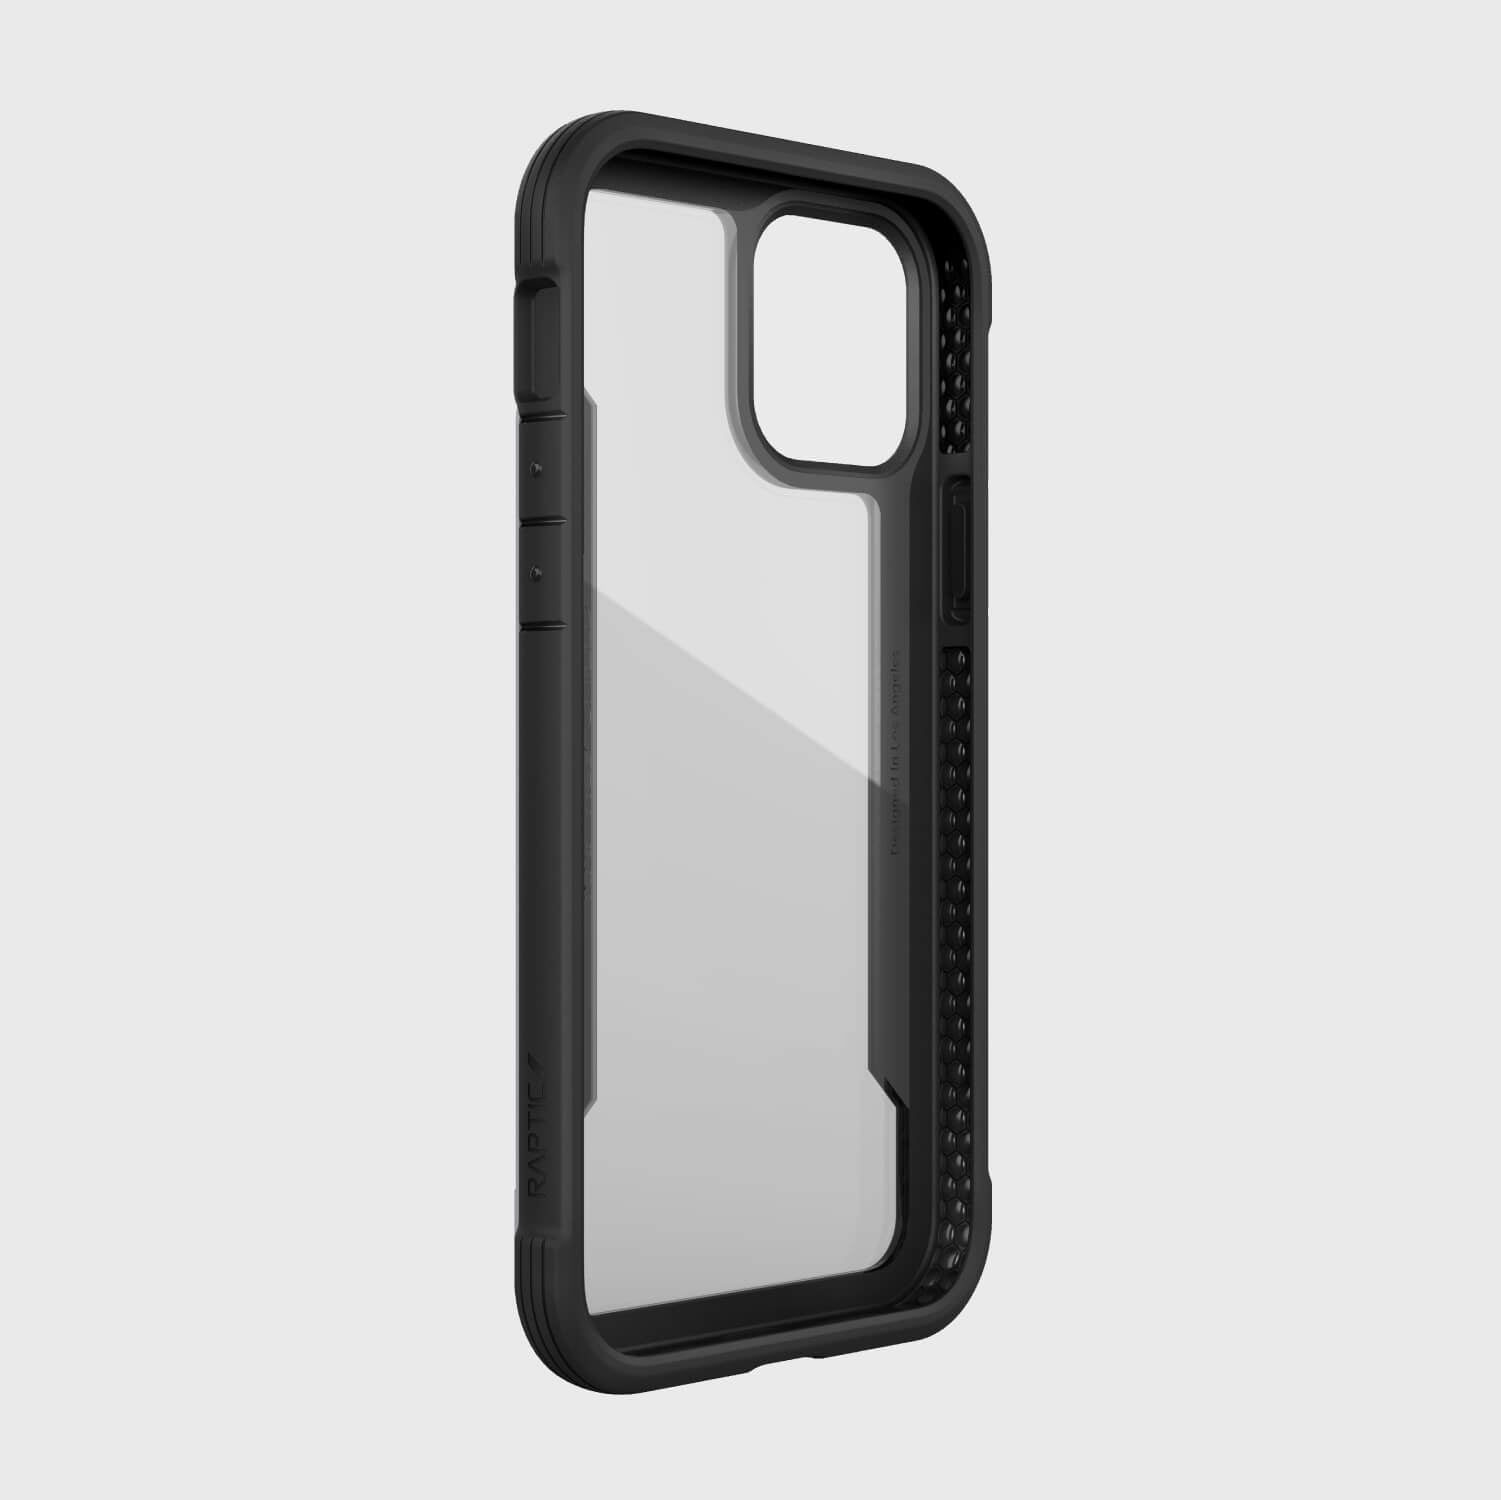 Raptic iPhone 12 Pro Max Case - SHIELD, providing foot drop protection.